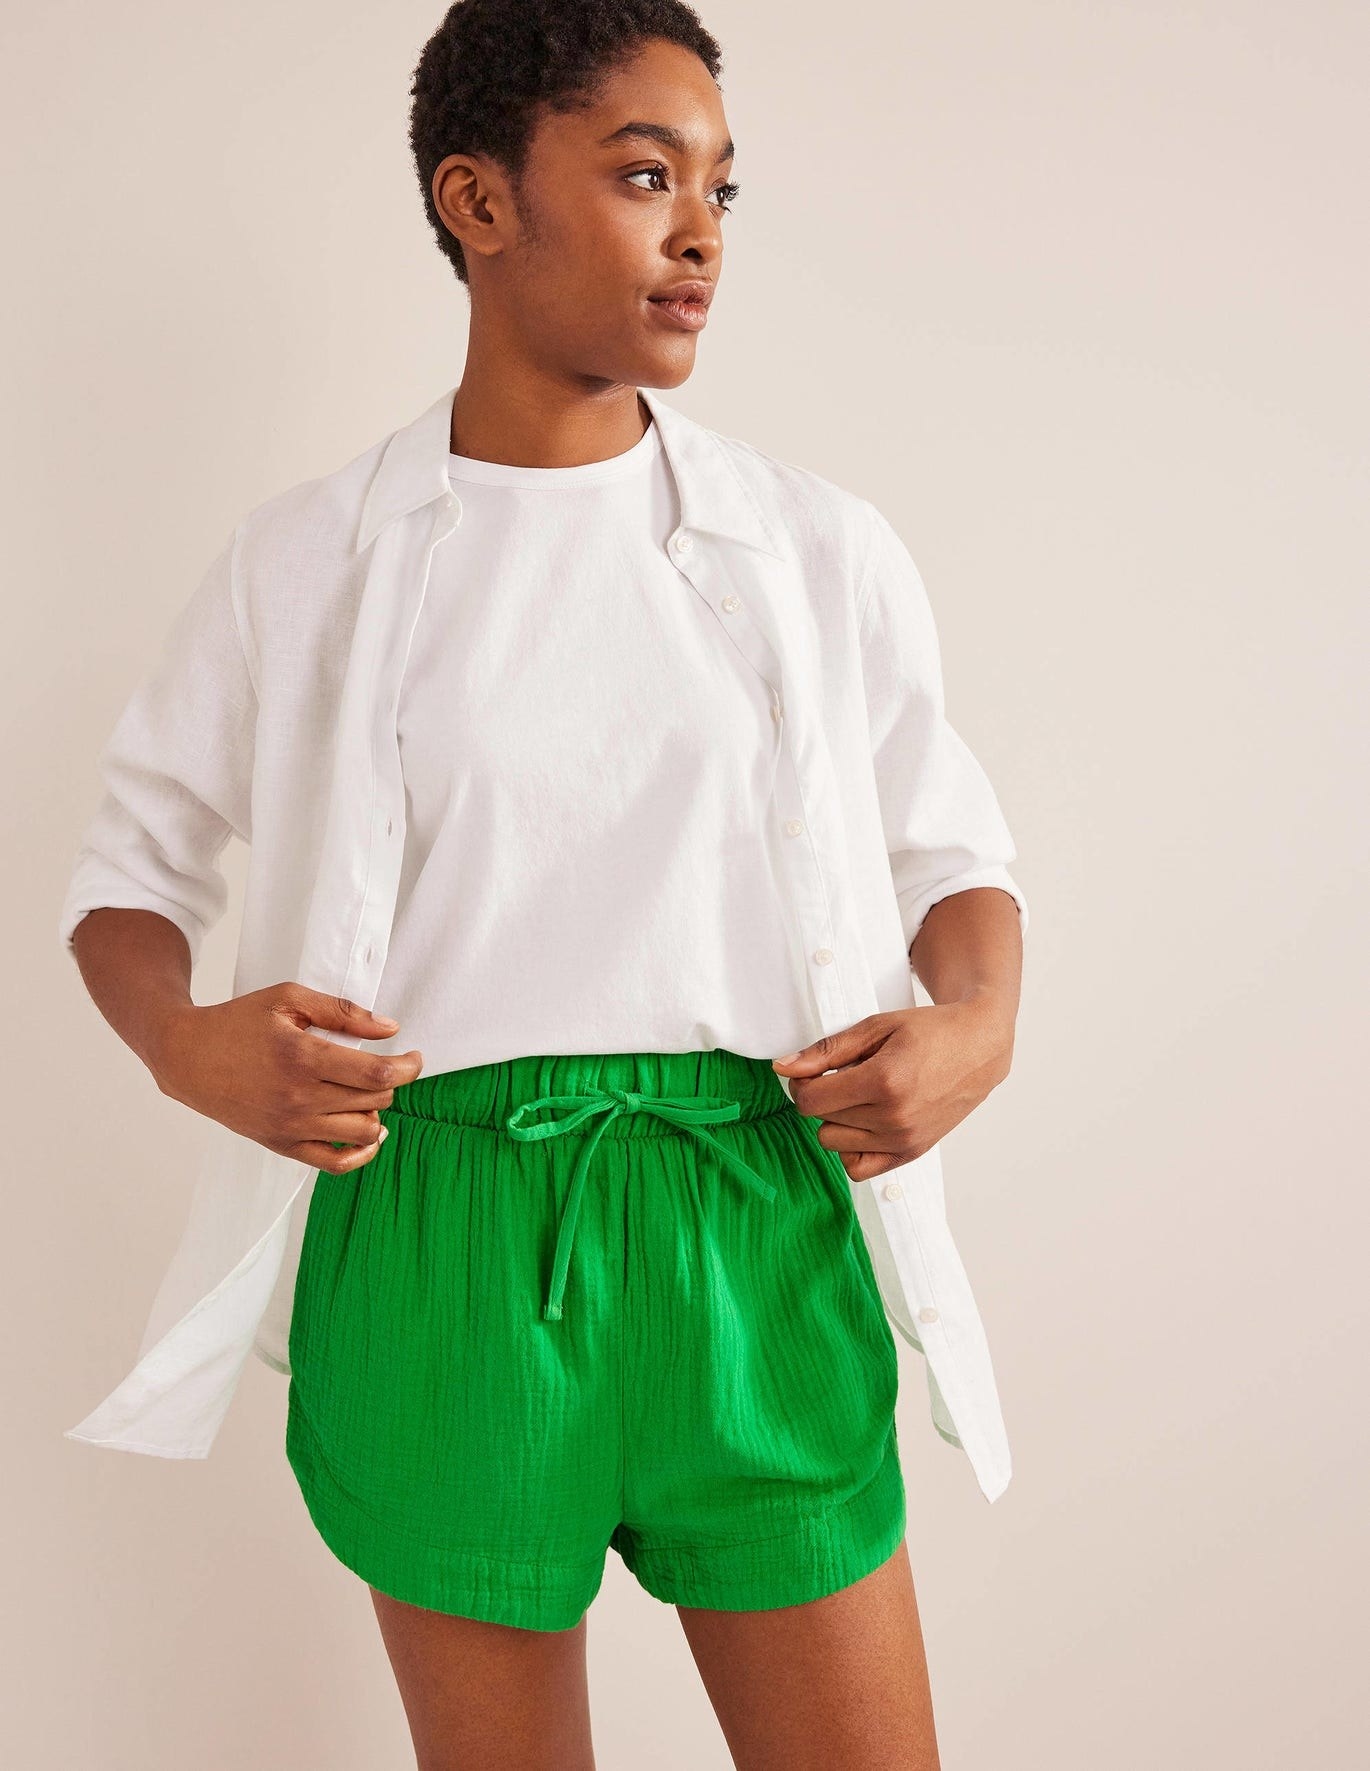 model in kelly green textured cheesecloth shorts with a tie waist styled with a white t-shirt and white button-up